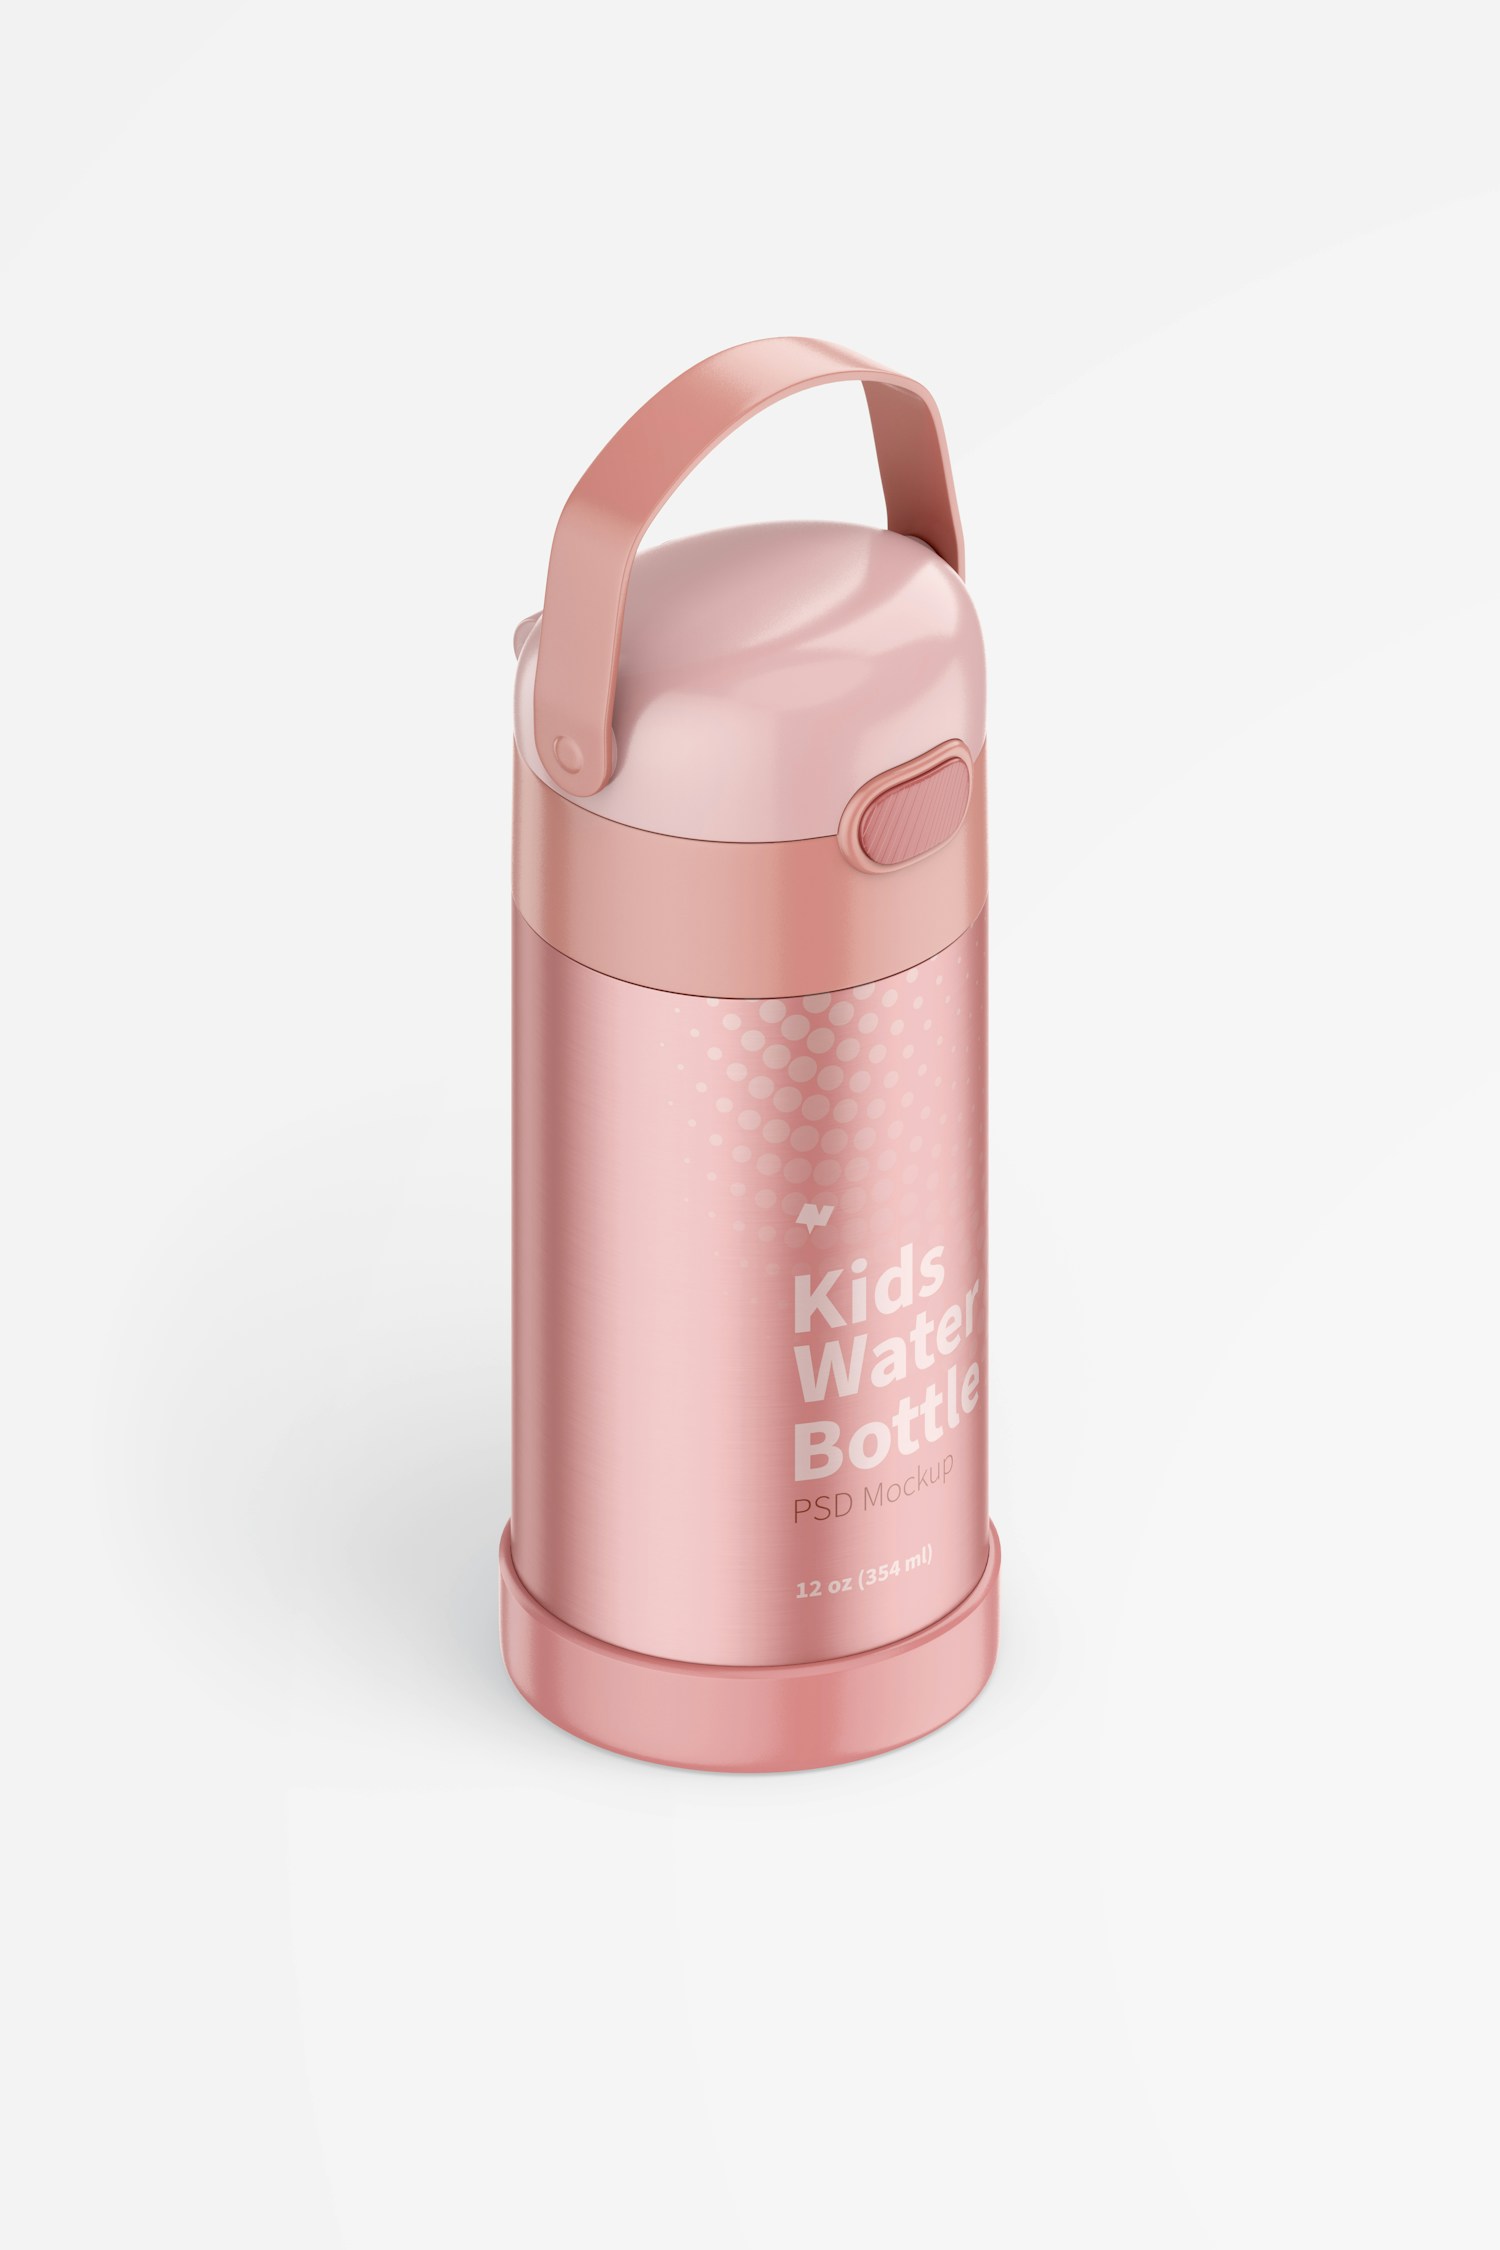 12 oz Kids Water Bottle Mockup, Isometric Right View